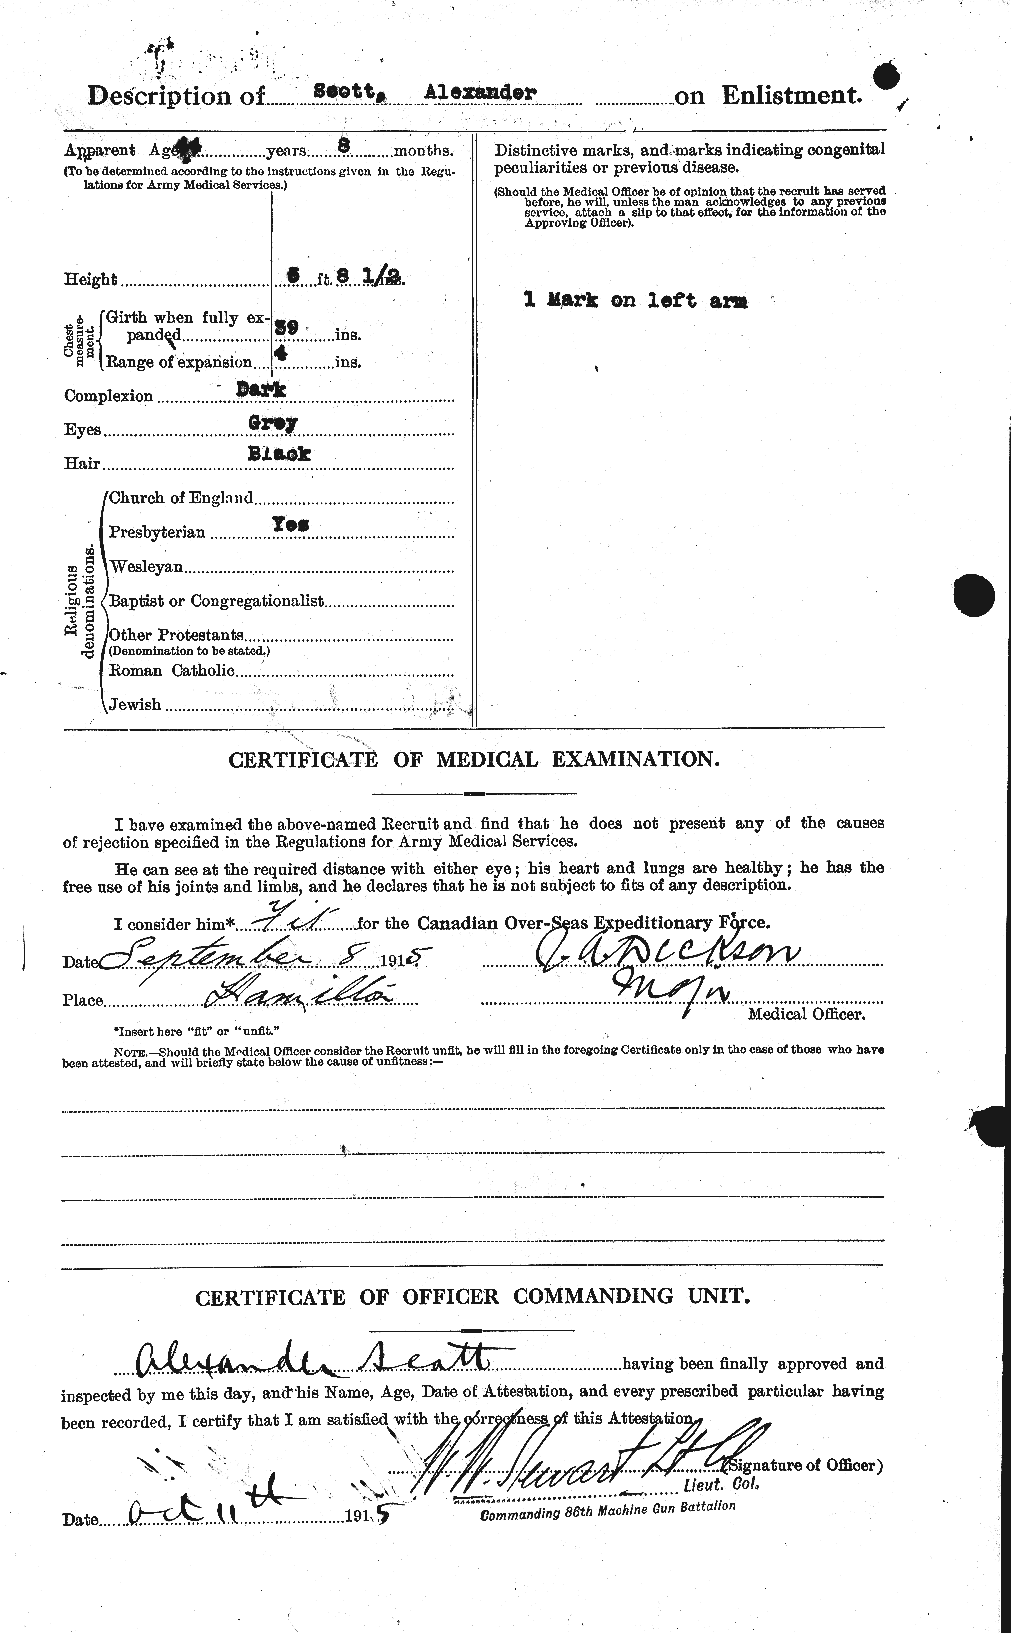 Personnel Records of the First World War - CEF 086607b